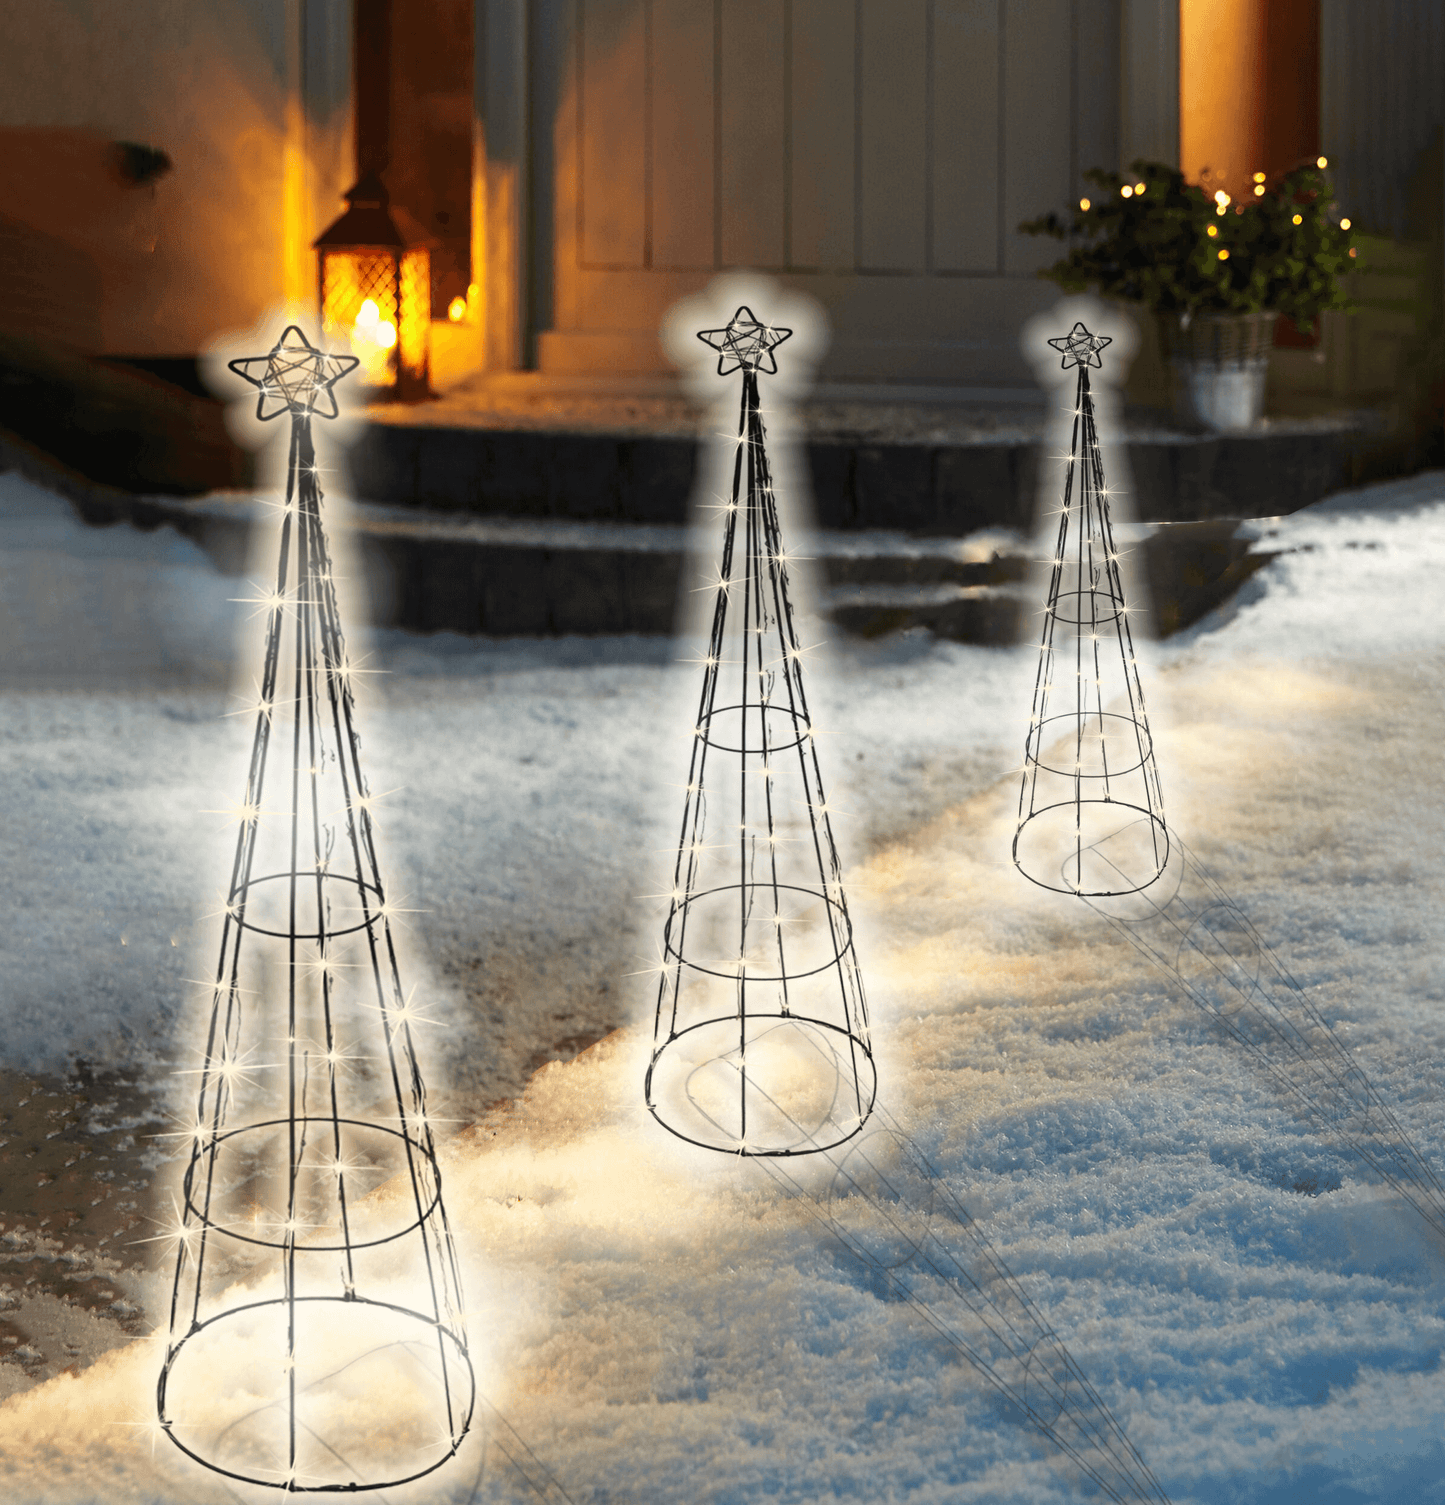 Christmas Tree Pathway Pyramid Cone Warm White LED Decorations - Set of 3 Lights Outdoor or Indoor Use